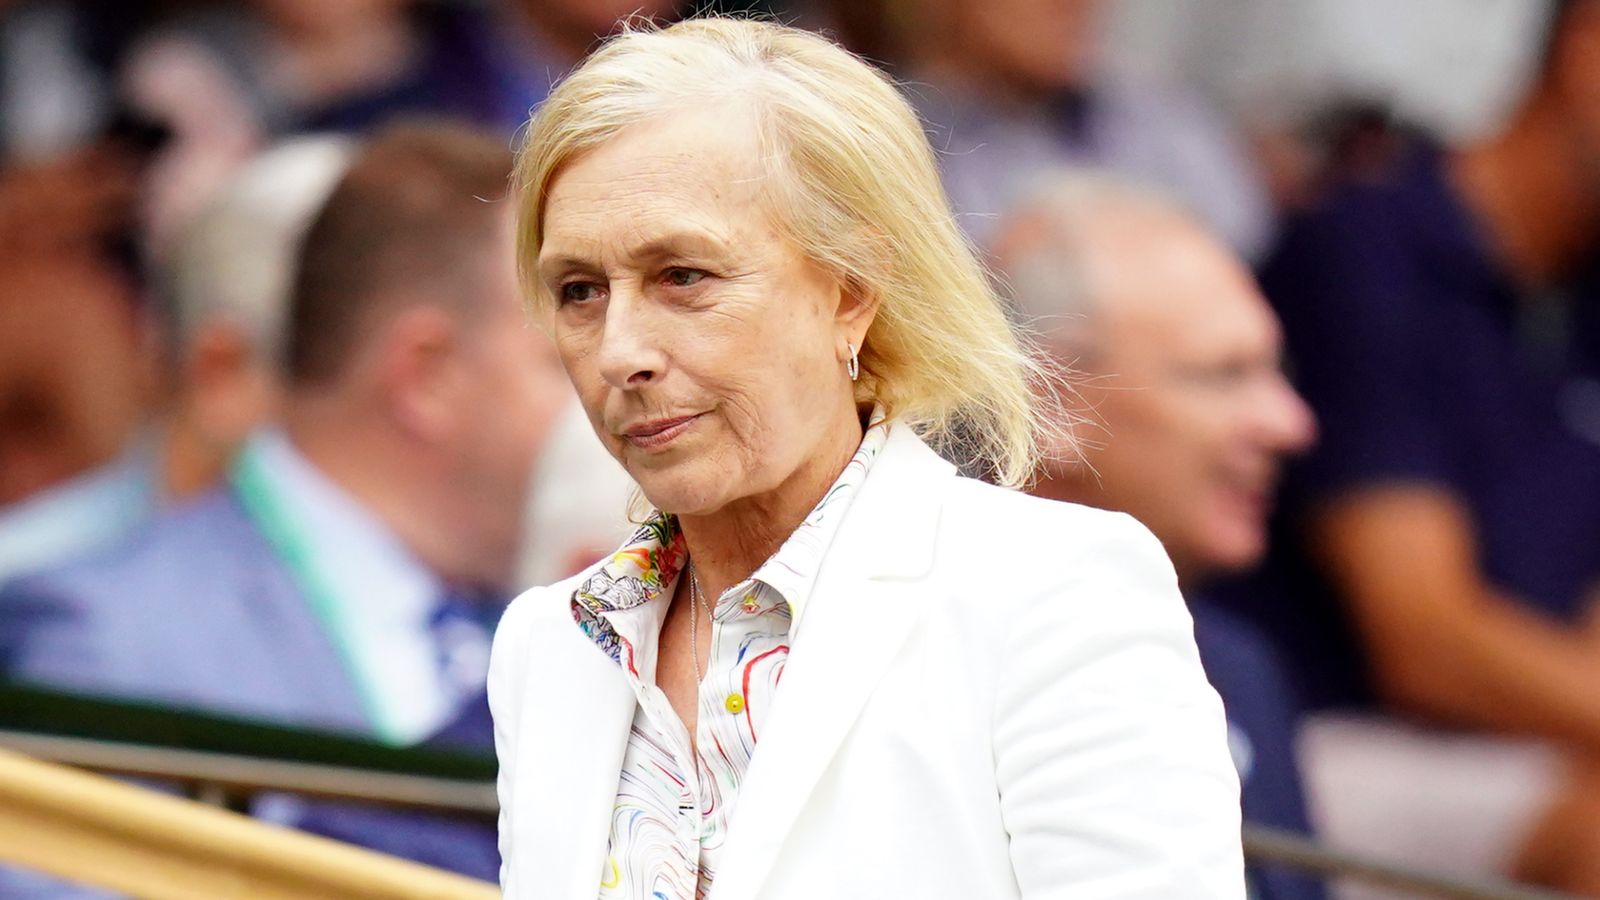 Martina Navratilova reveals she is ‘cancer free’ after fearing she ‘may not see next Christmas’ | Tennis News